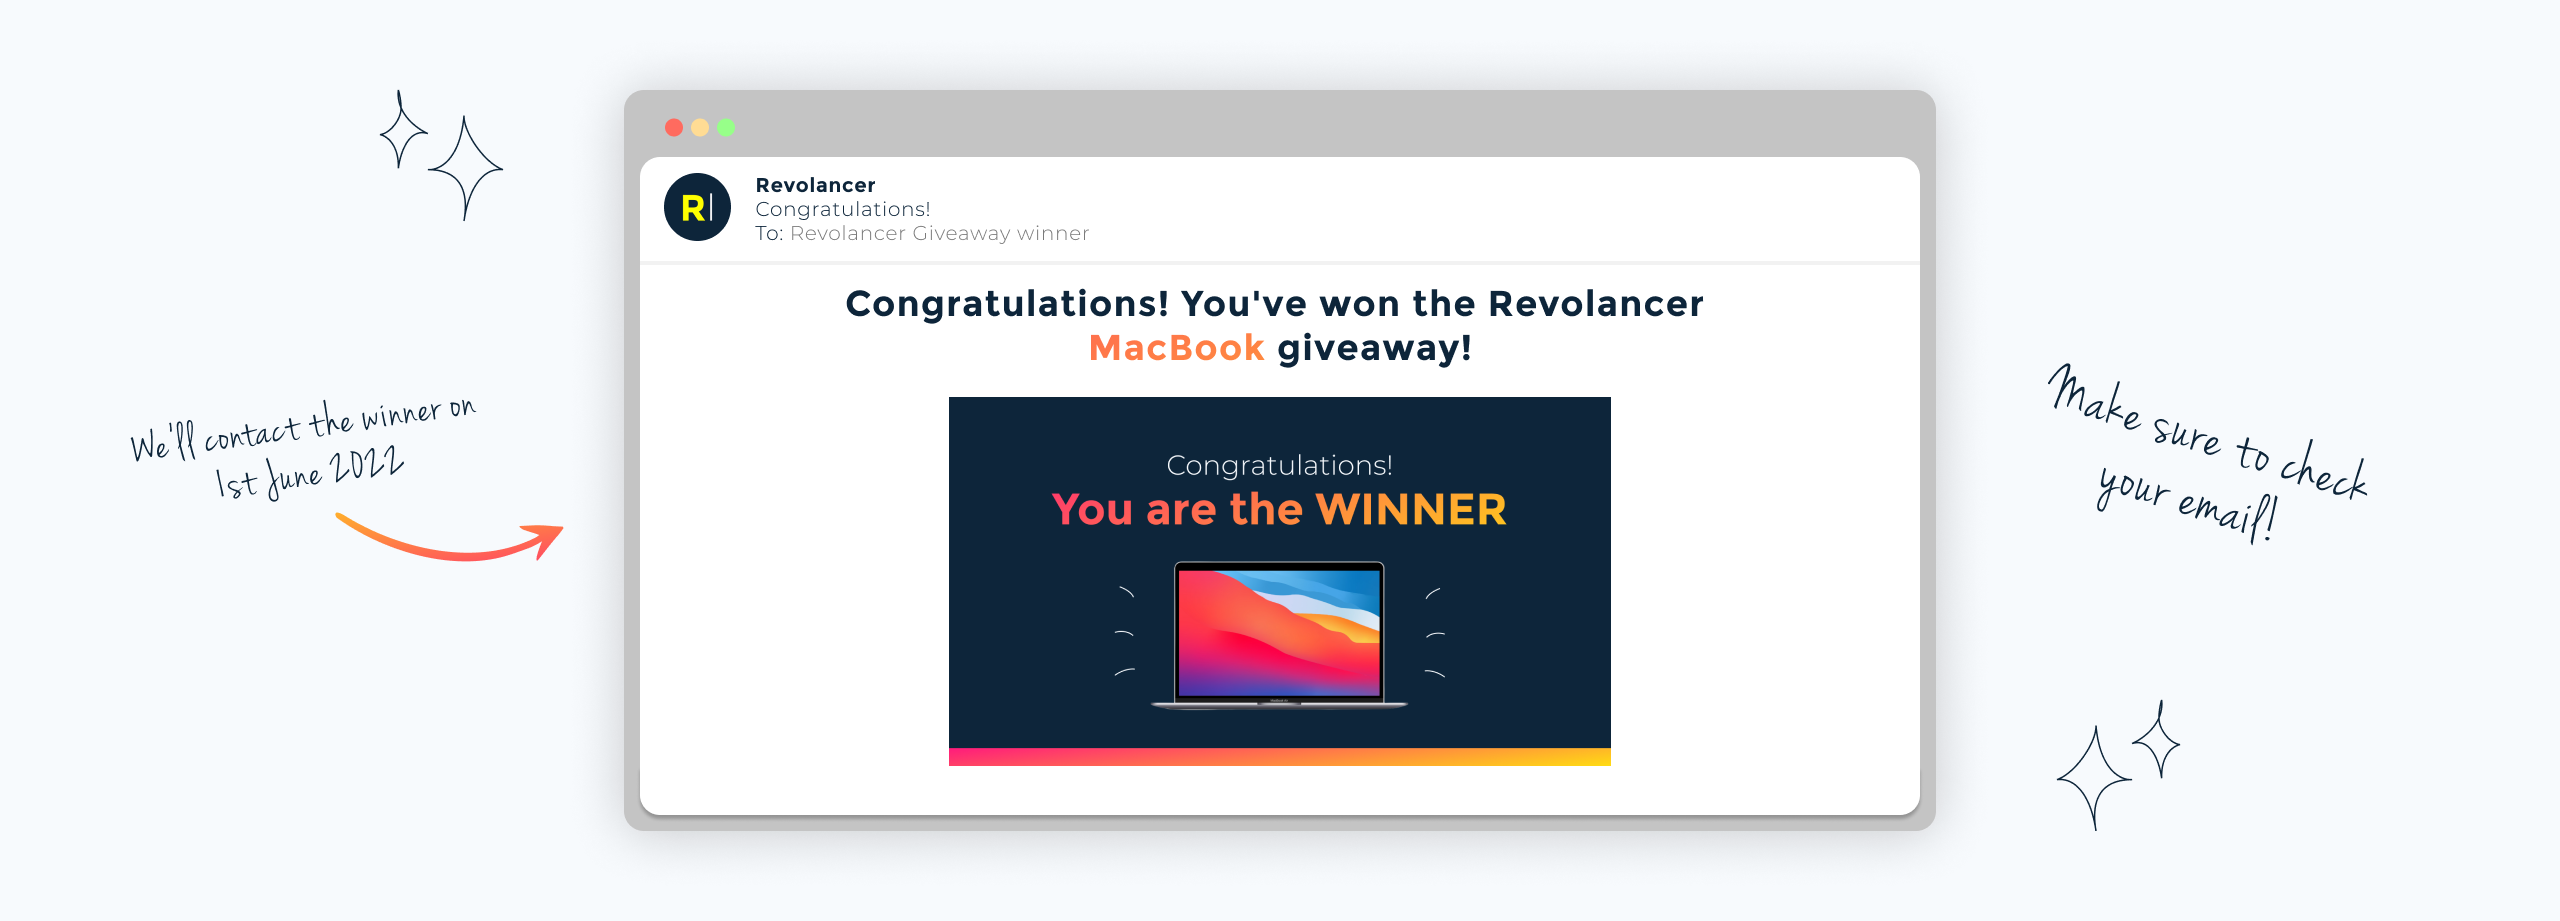 email mockup with text, competition winner notification